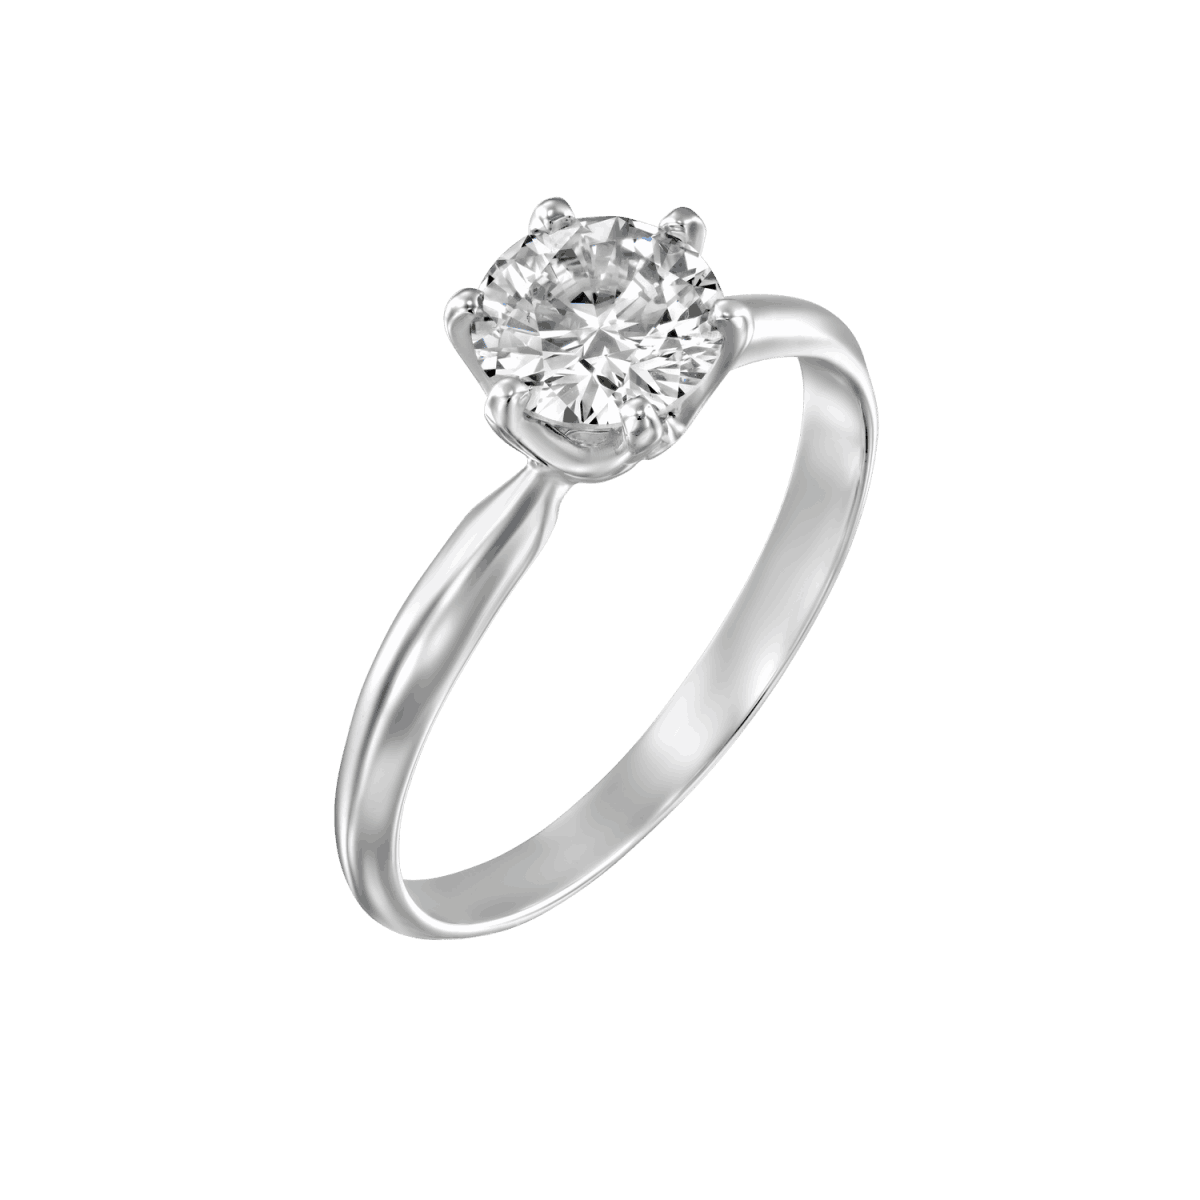 "Claire" - White Gold Lab Grown Diamond Engagement Ring 0.75ct. - main